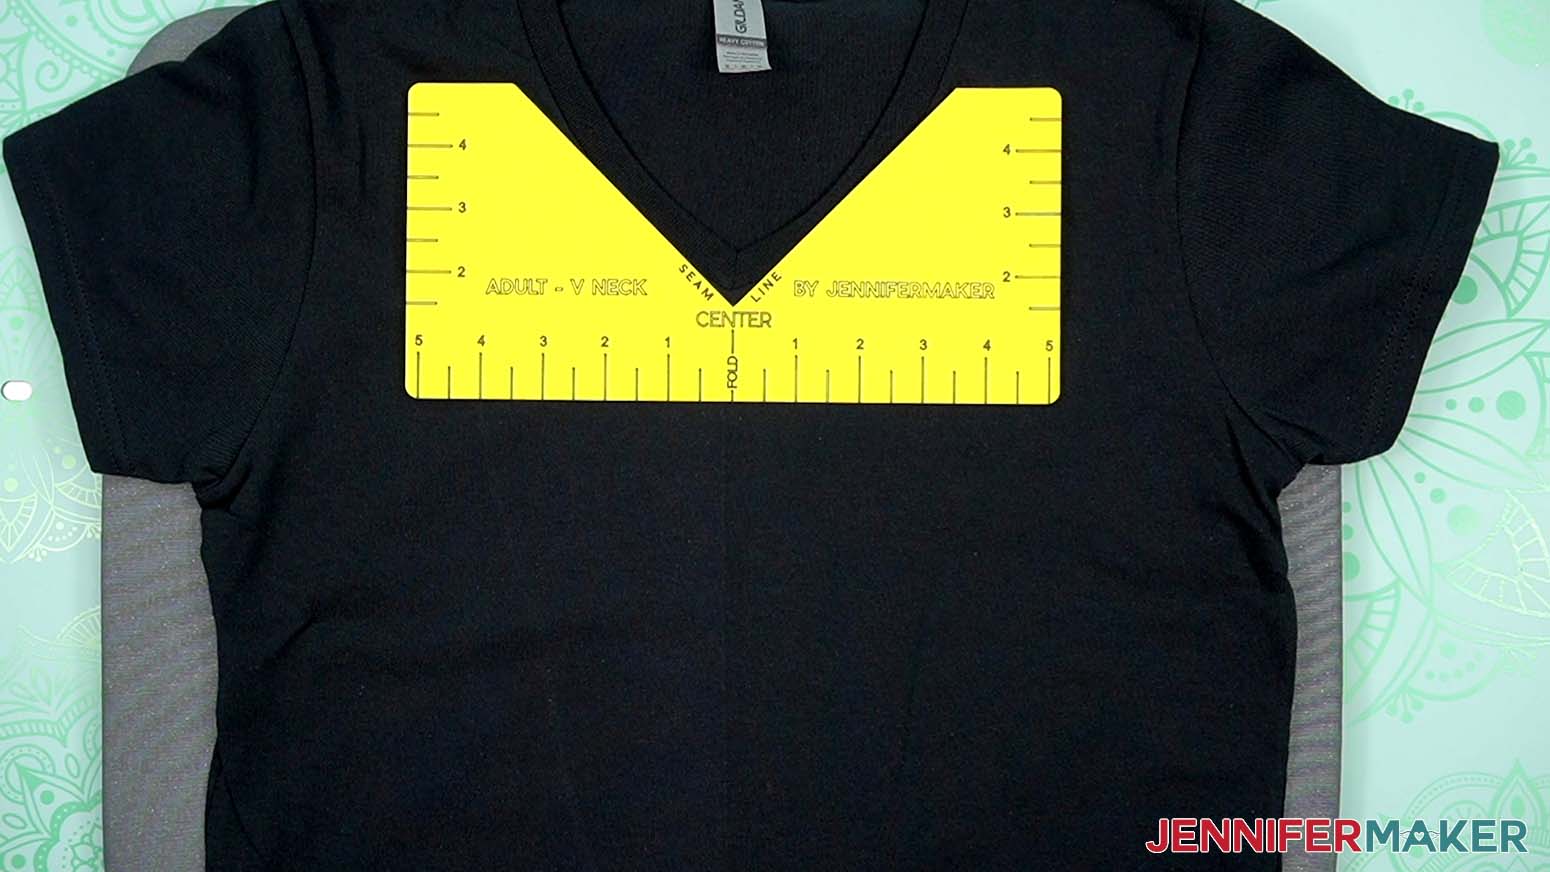 Then - if you're using one - line up the correct T-Shirt Ruler Guide's center line on the crease. Now your design will be placed in the standard spot for a T-shirt of this size and style.